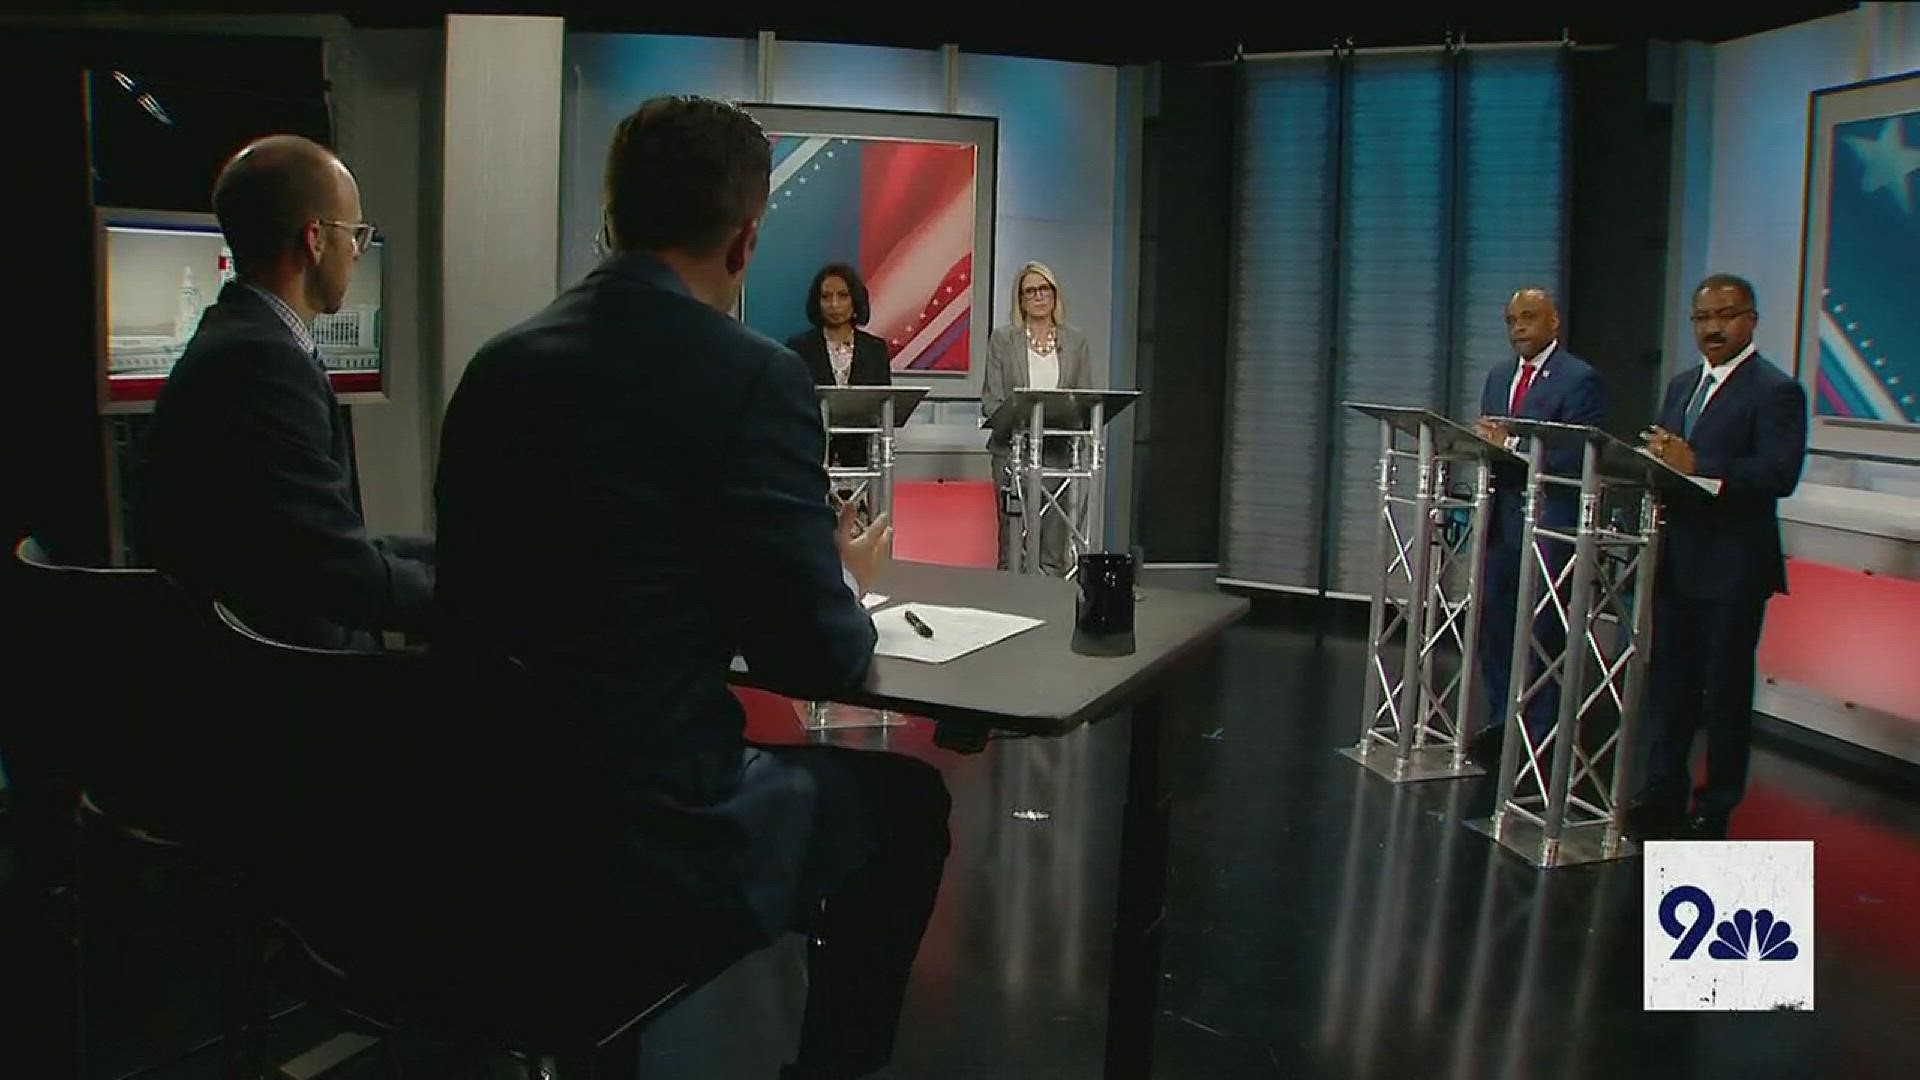 Mayoral candidate Lisa Calderón discussed the public safety budget during a live 9NEWS debate.